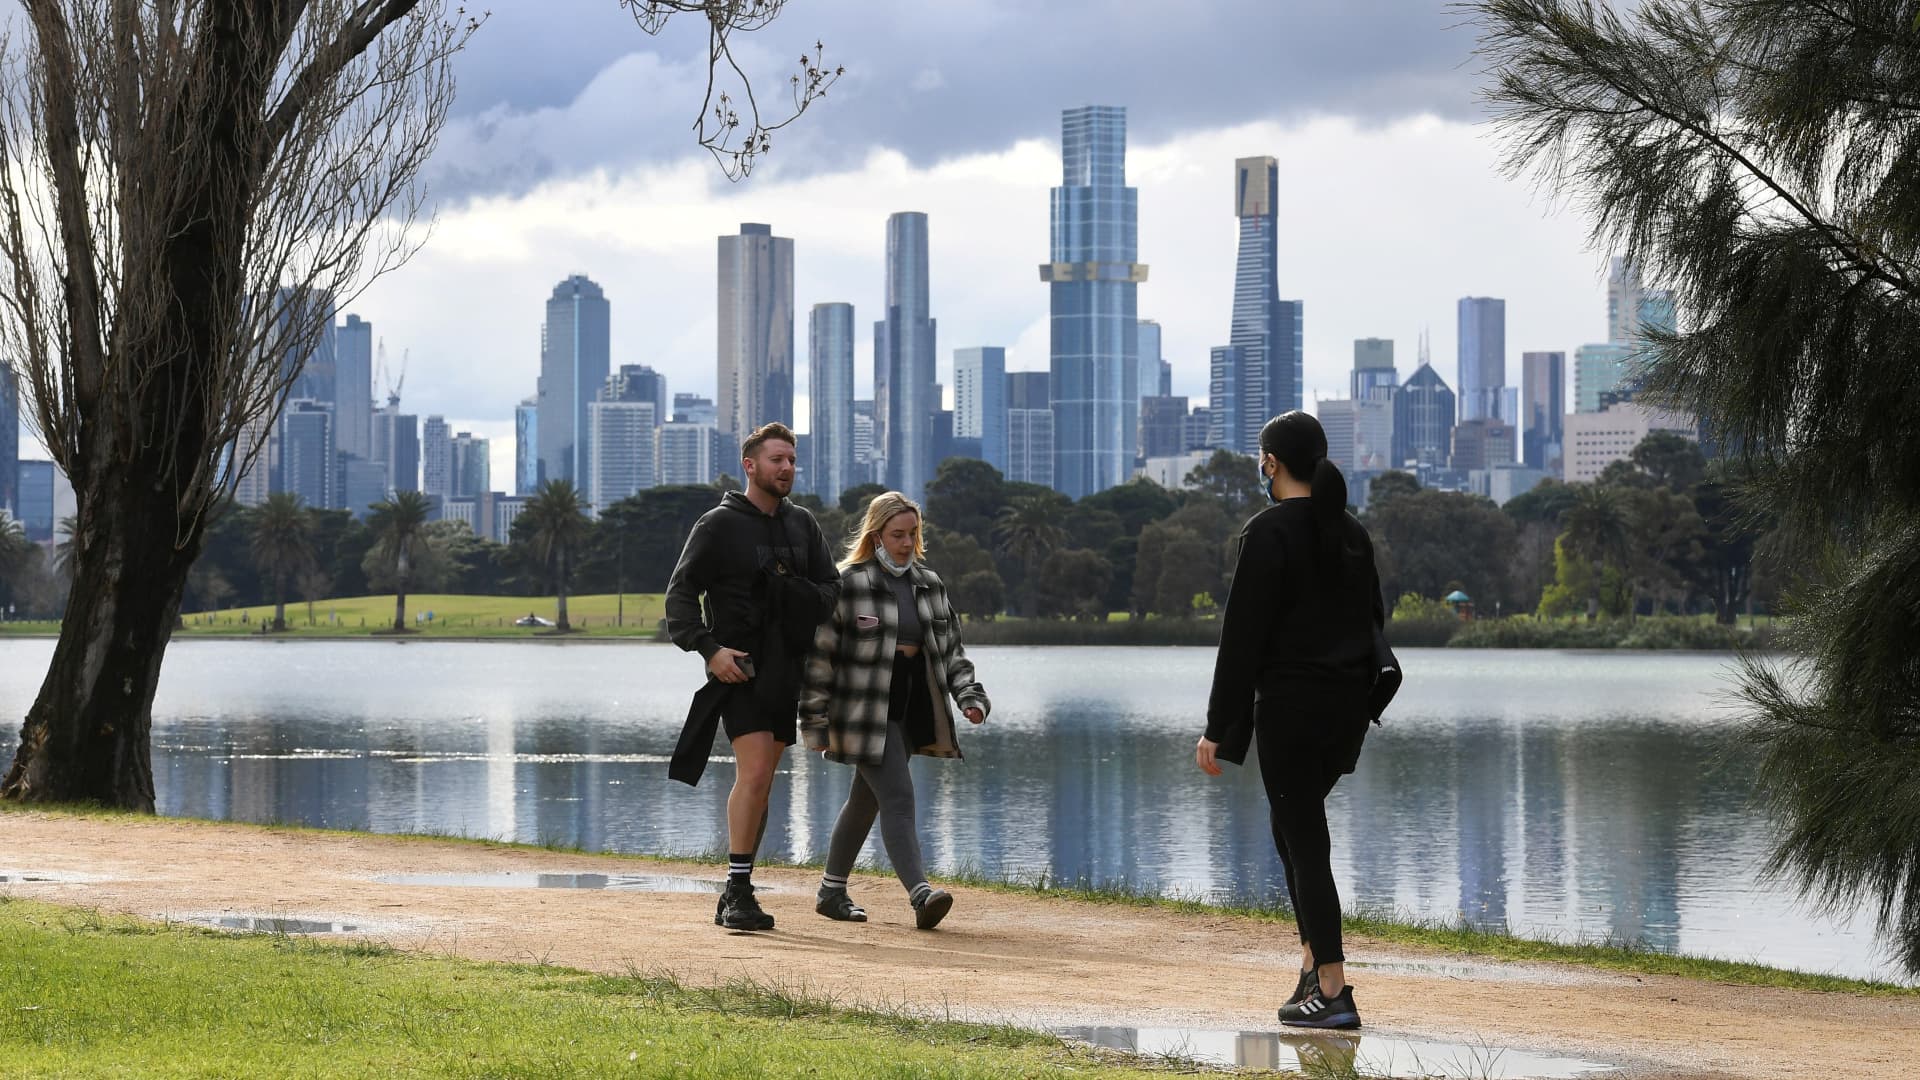 Since hitting peak prices earlier this year, house prices in Melbourne have fallen nearly 5%.